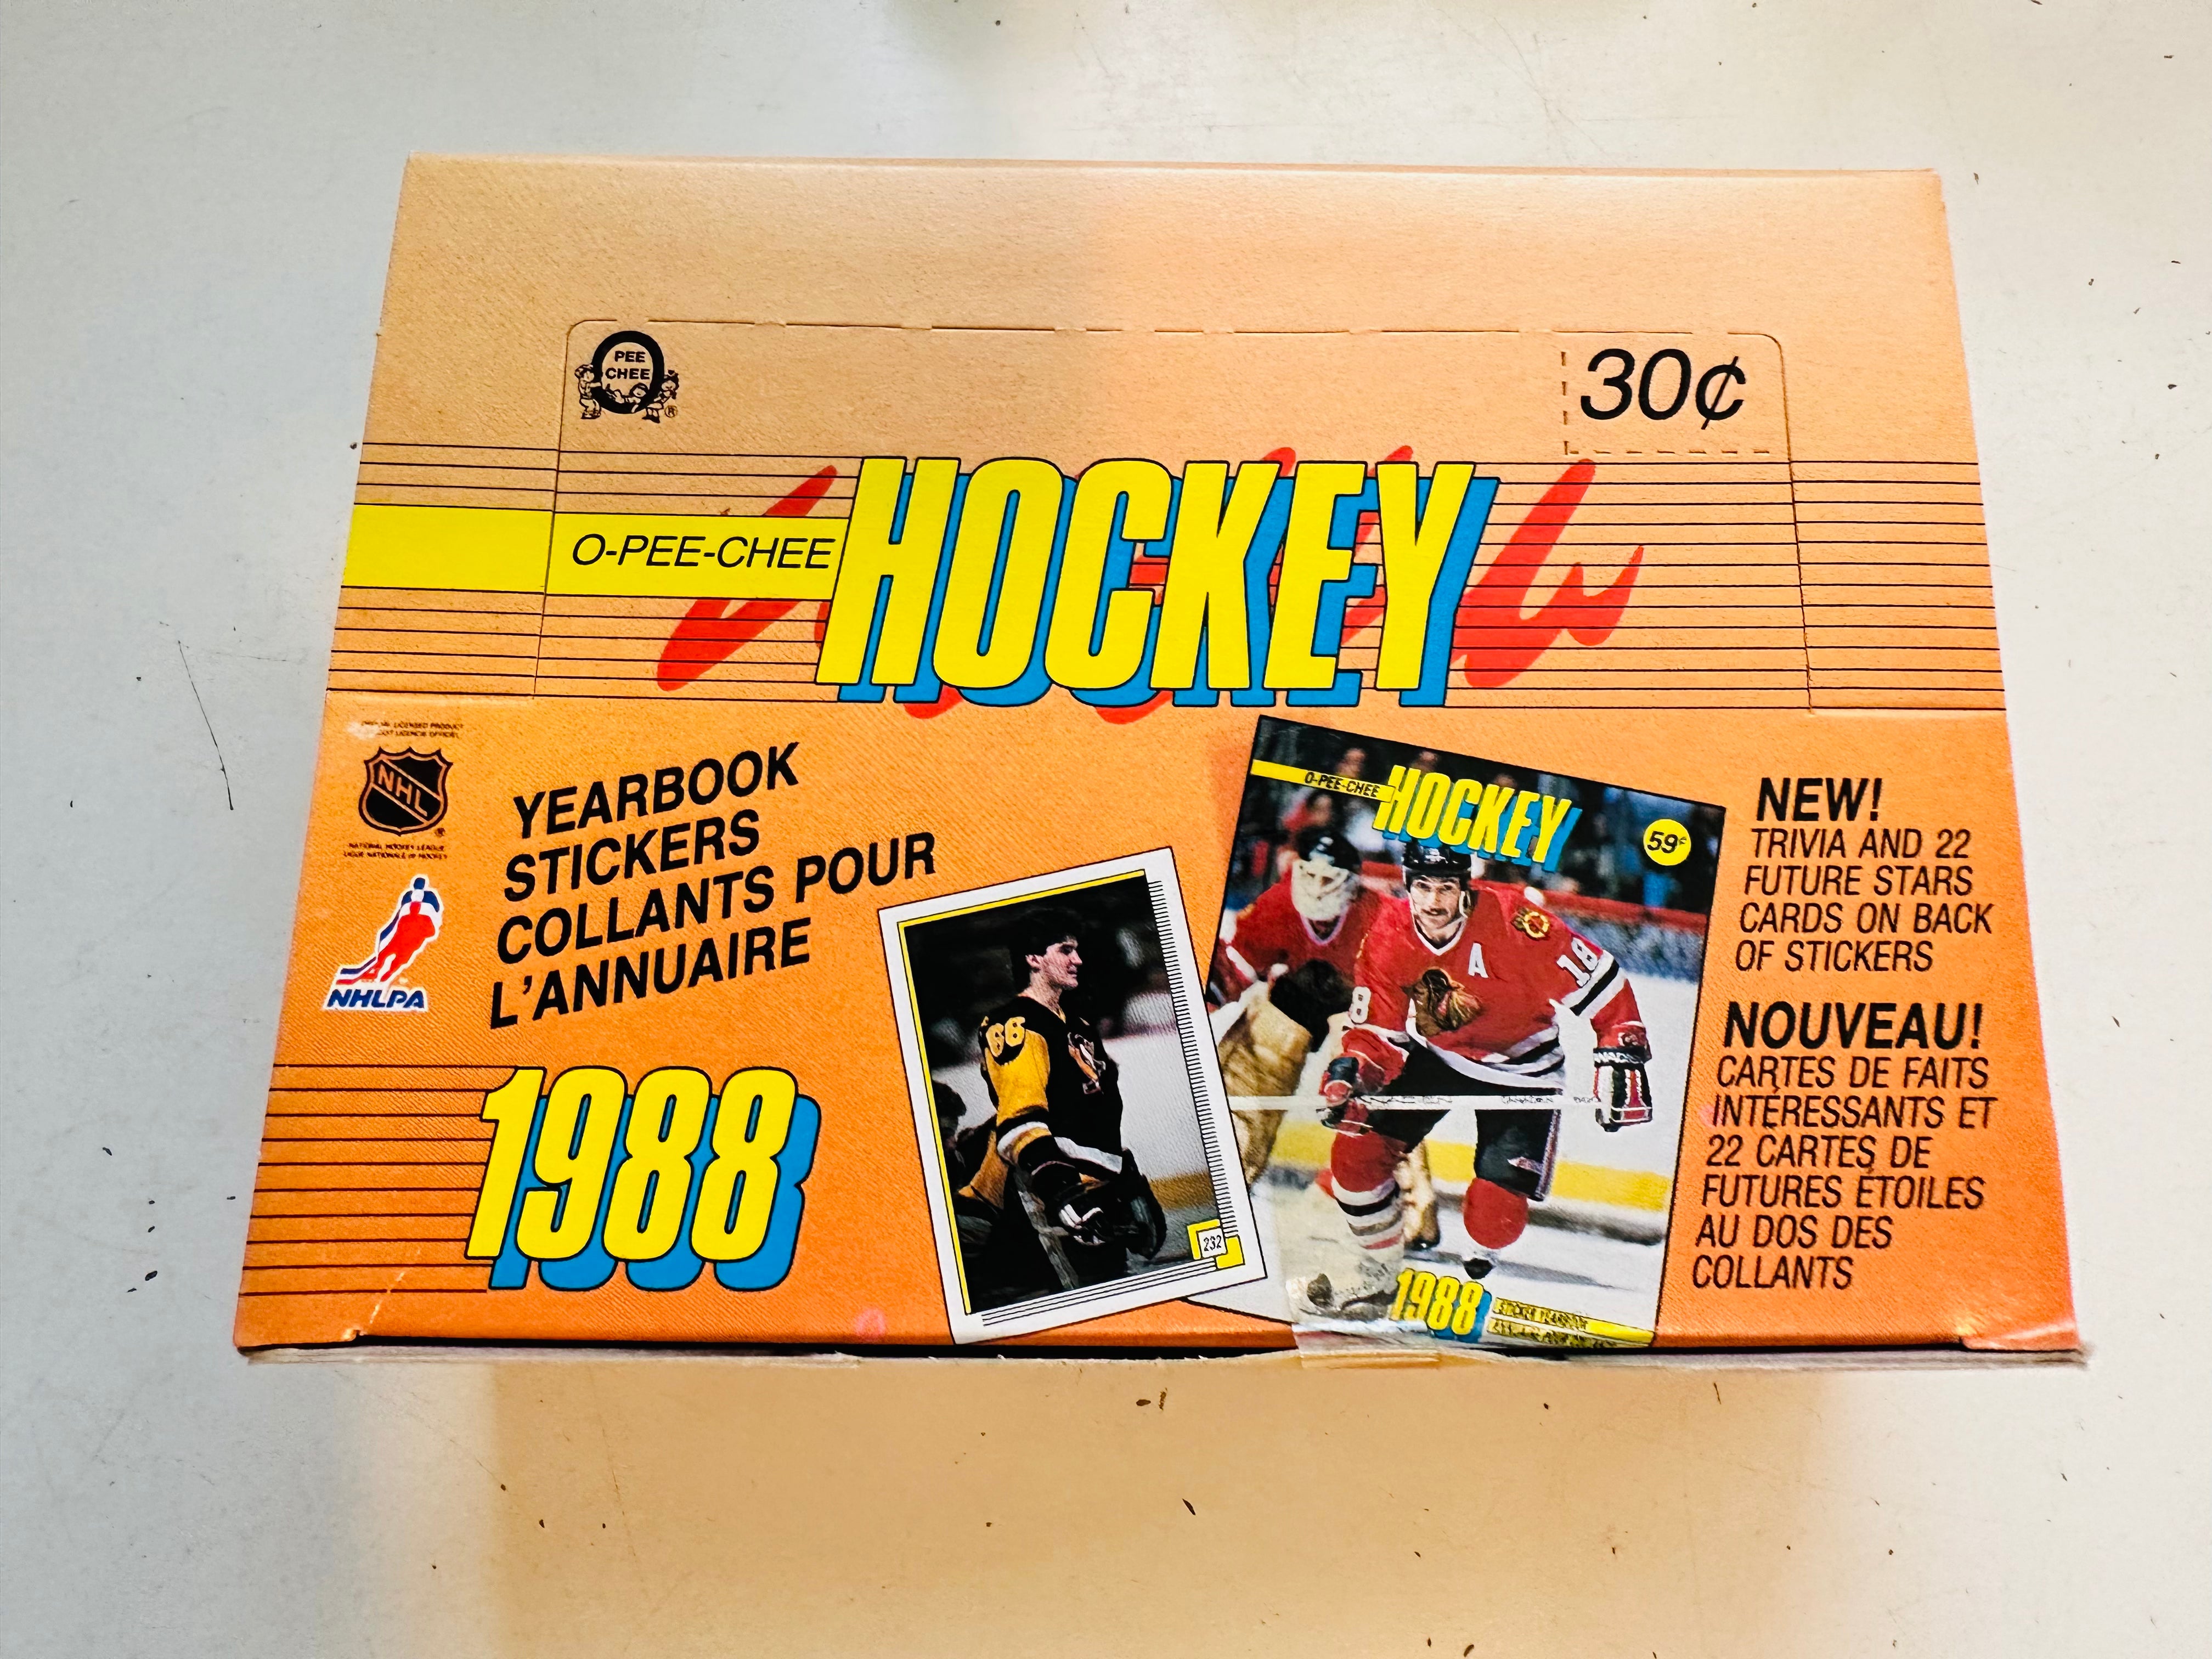 1988 Opc yearbook stickers 48 packs box